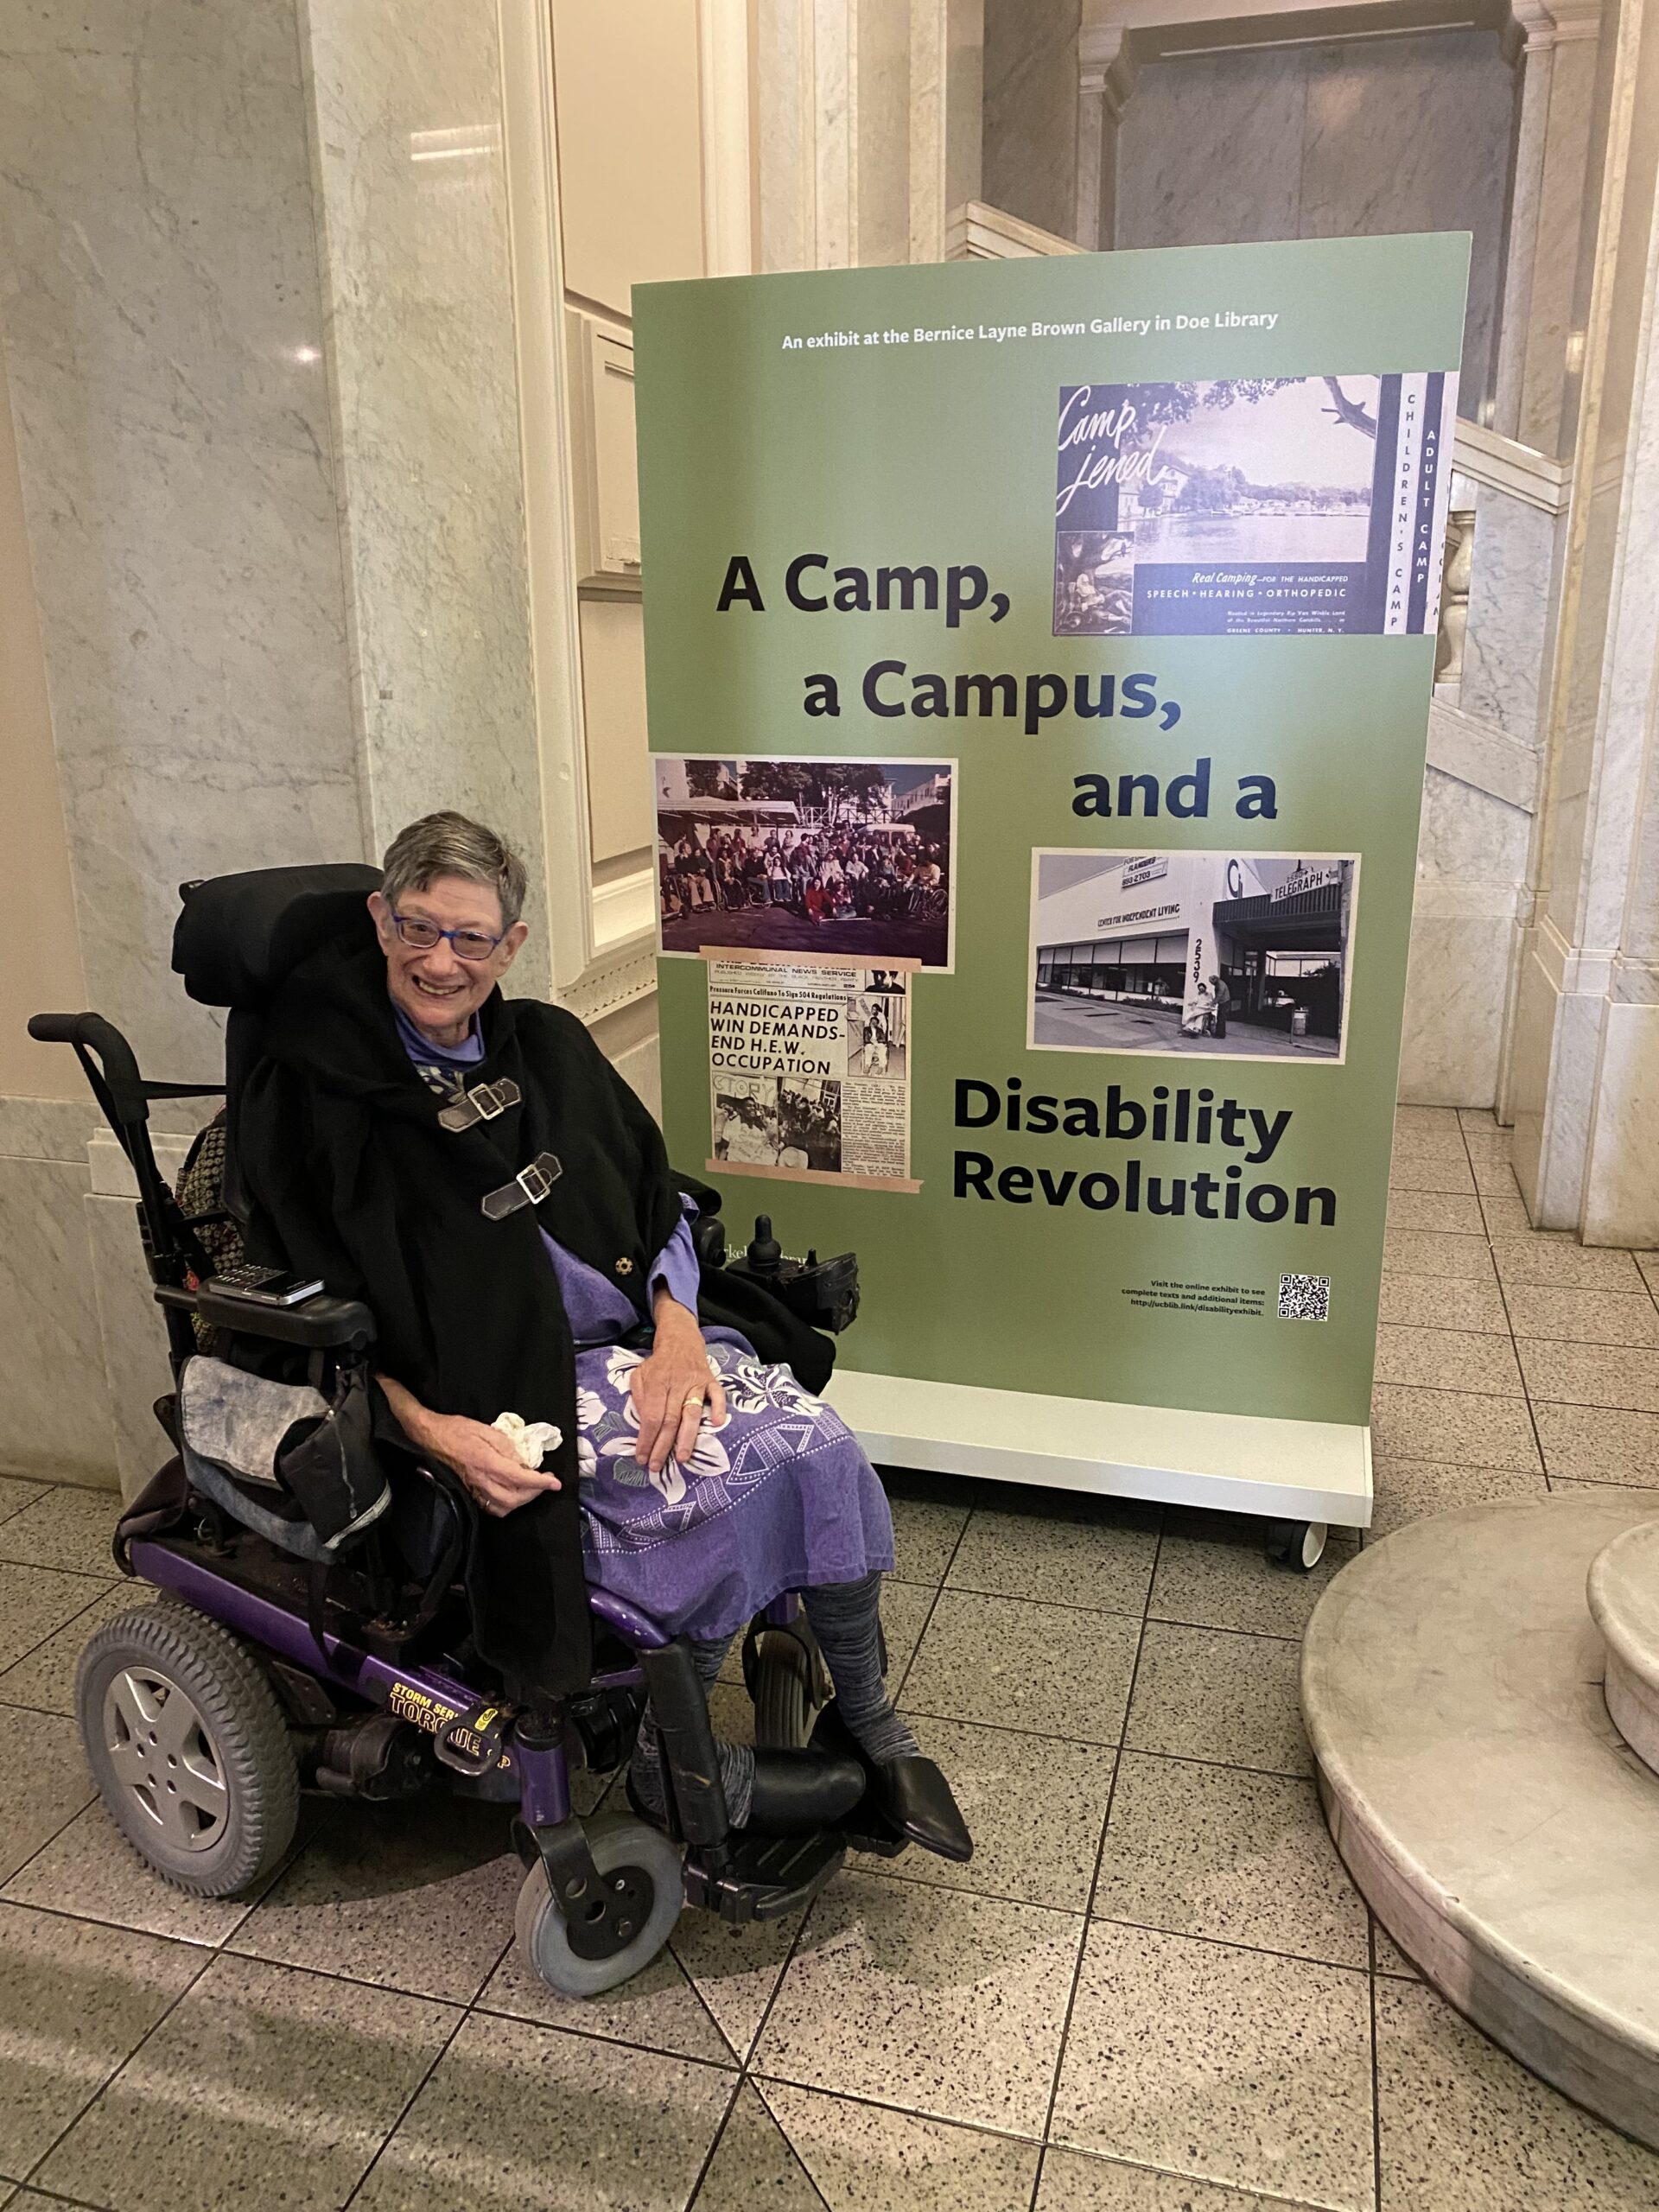 Denise Sherer Jacobson smiling next to a banner that says "A Camp, a Campus, and a Disability Revolution"